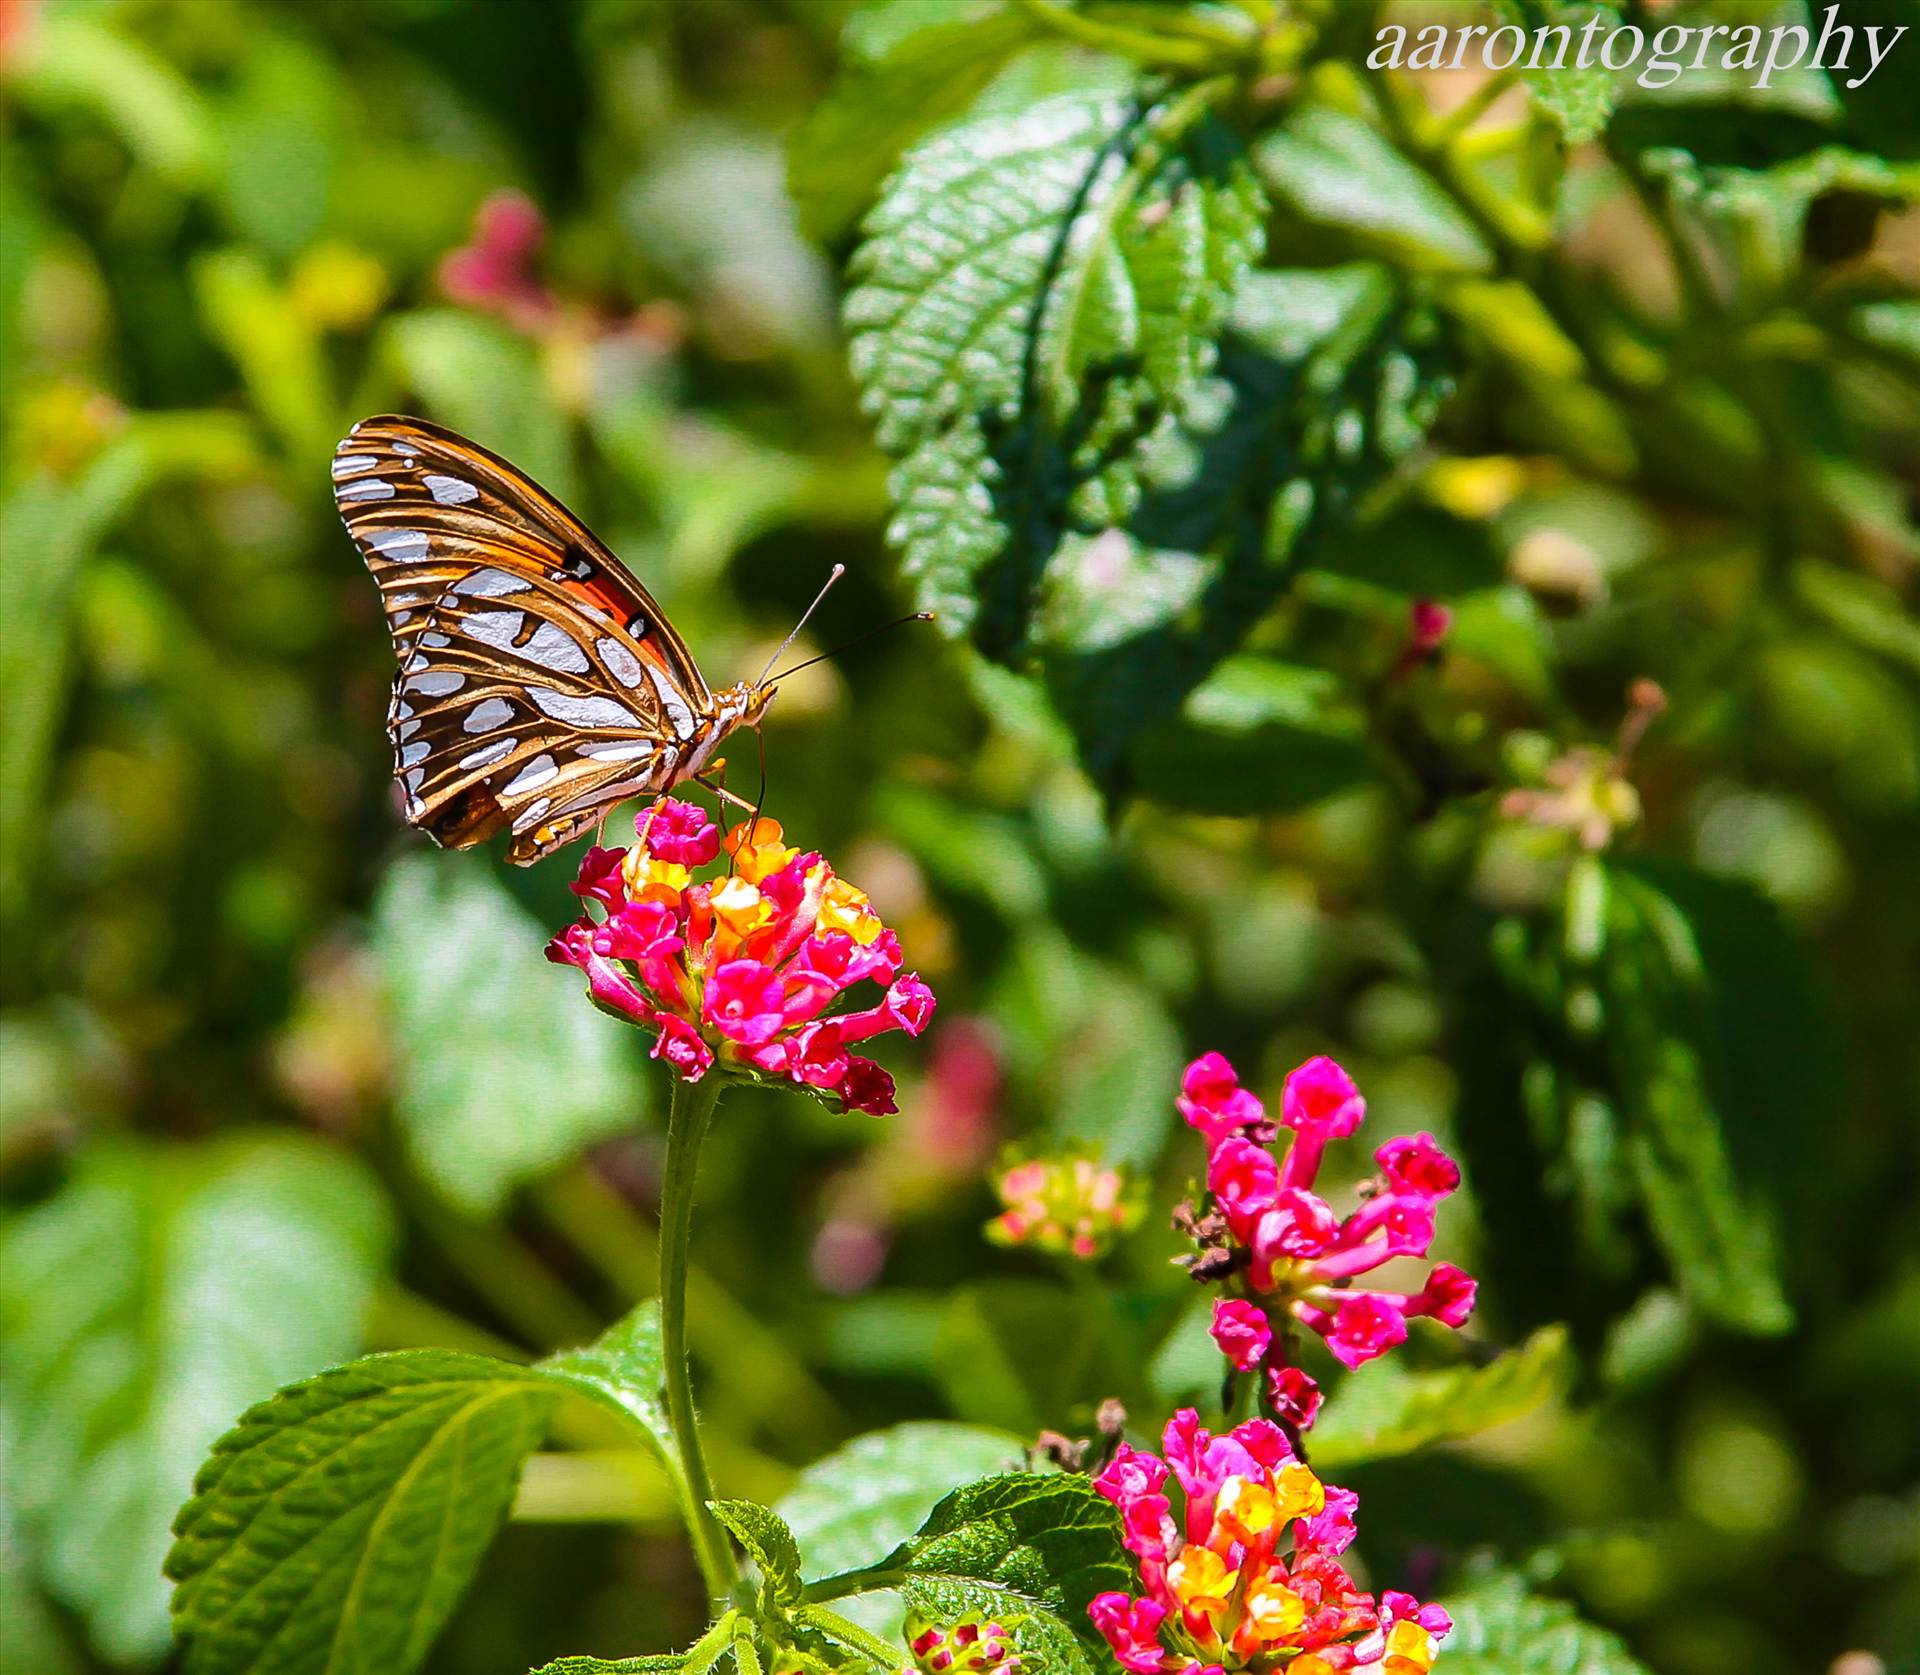 Butterfly and green.jpg - undefined by Aaron